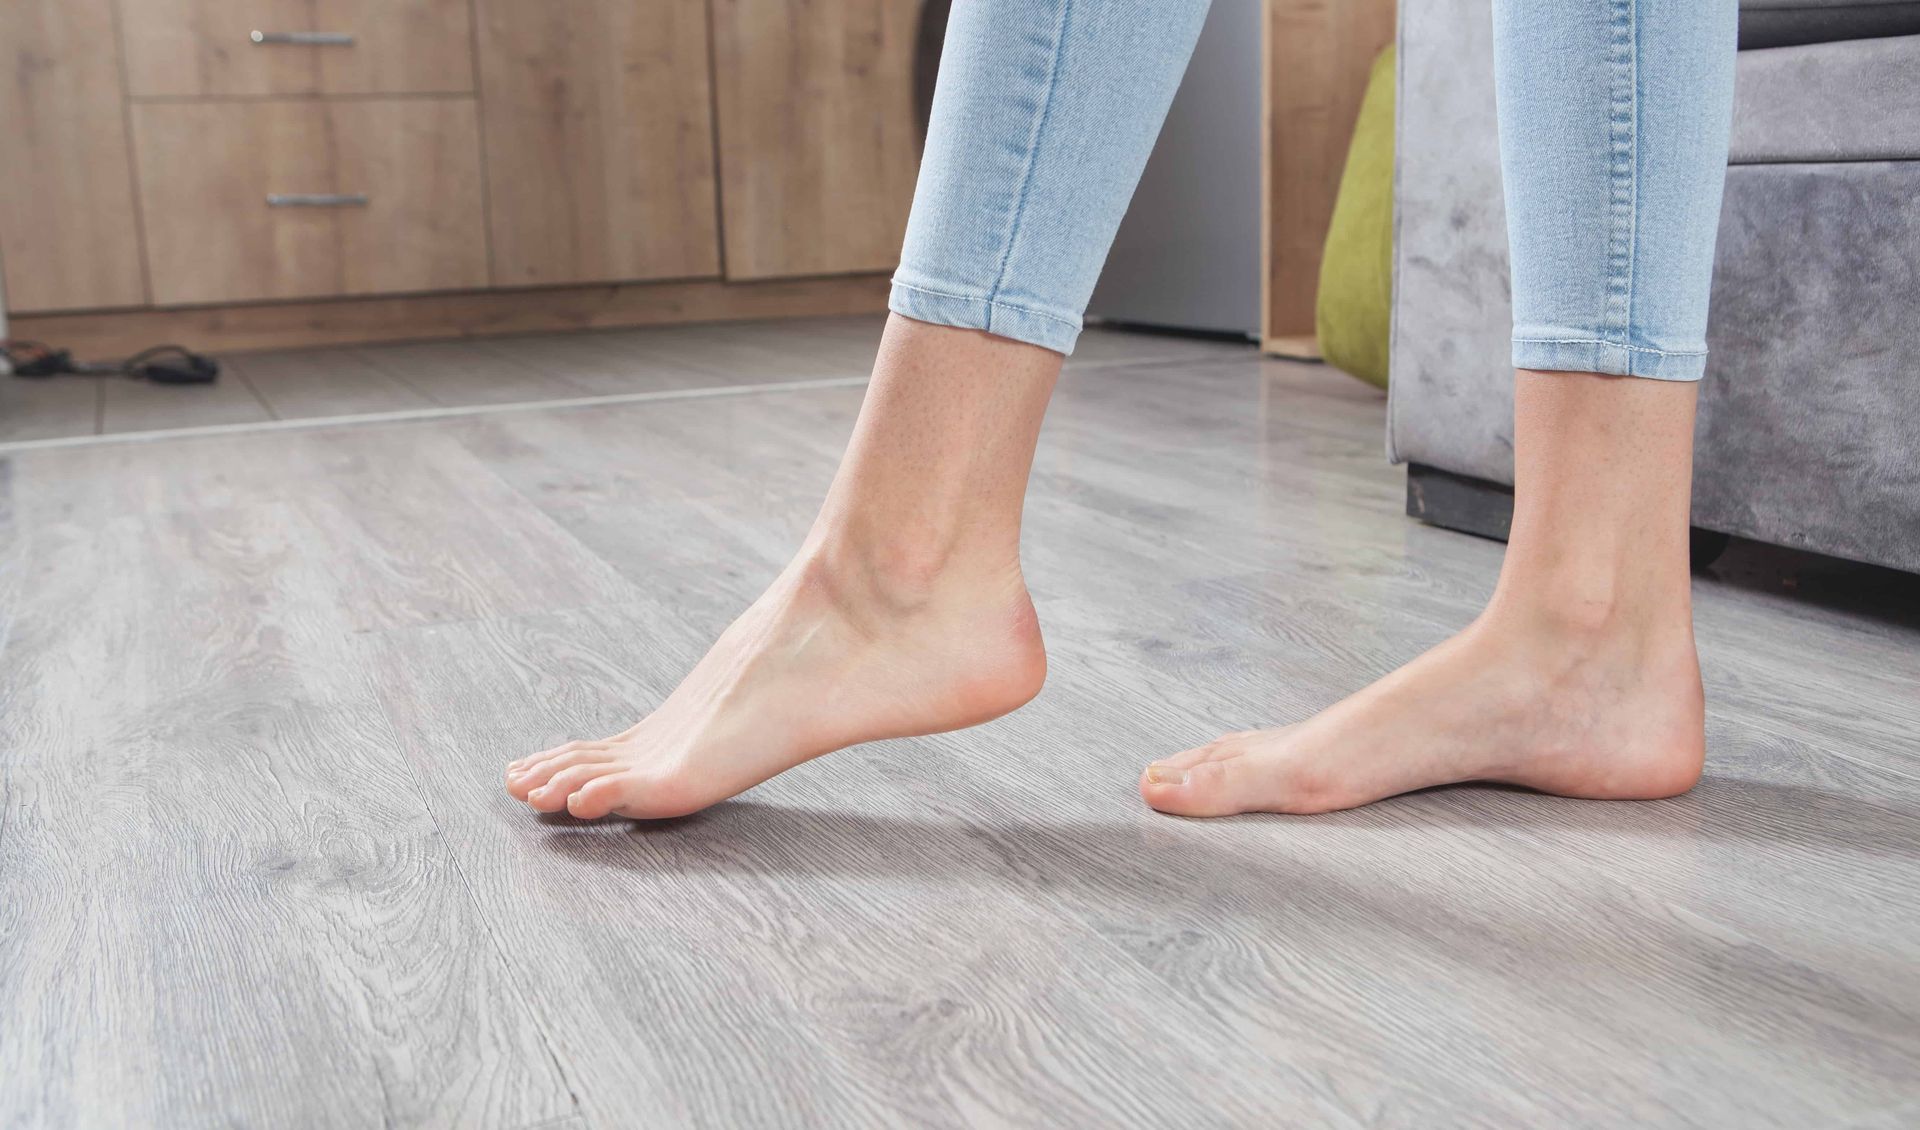 Woman walking on new flooring with bare feet